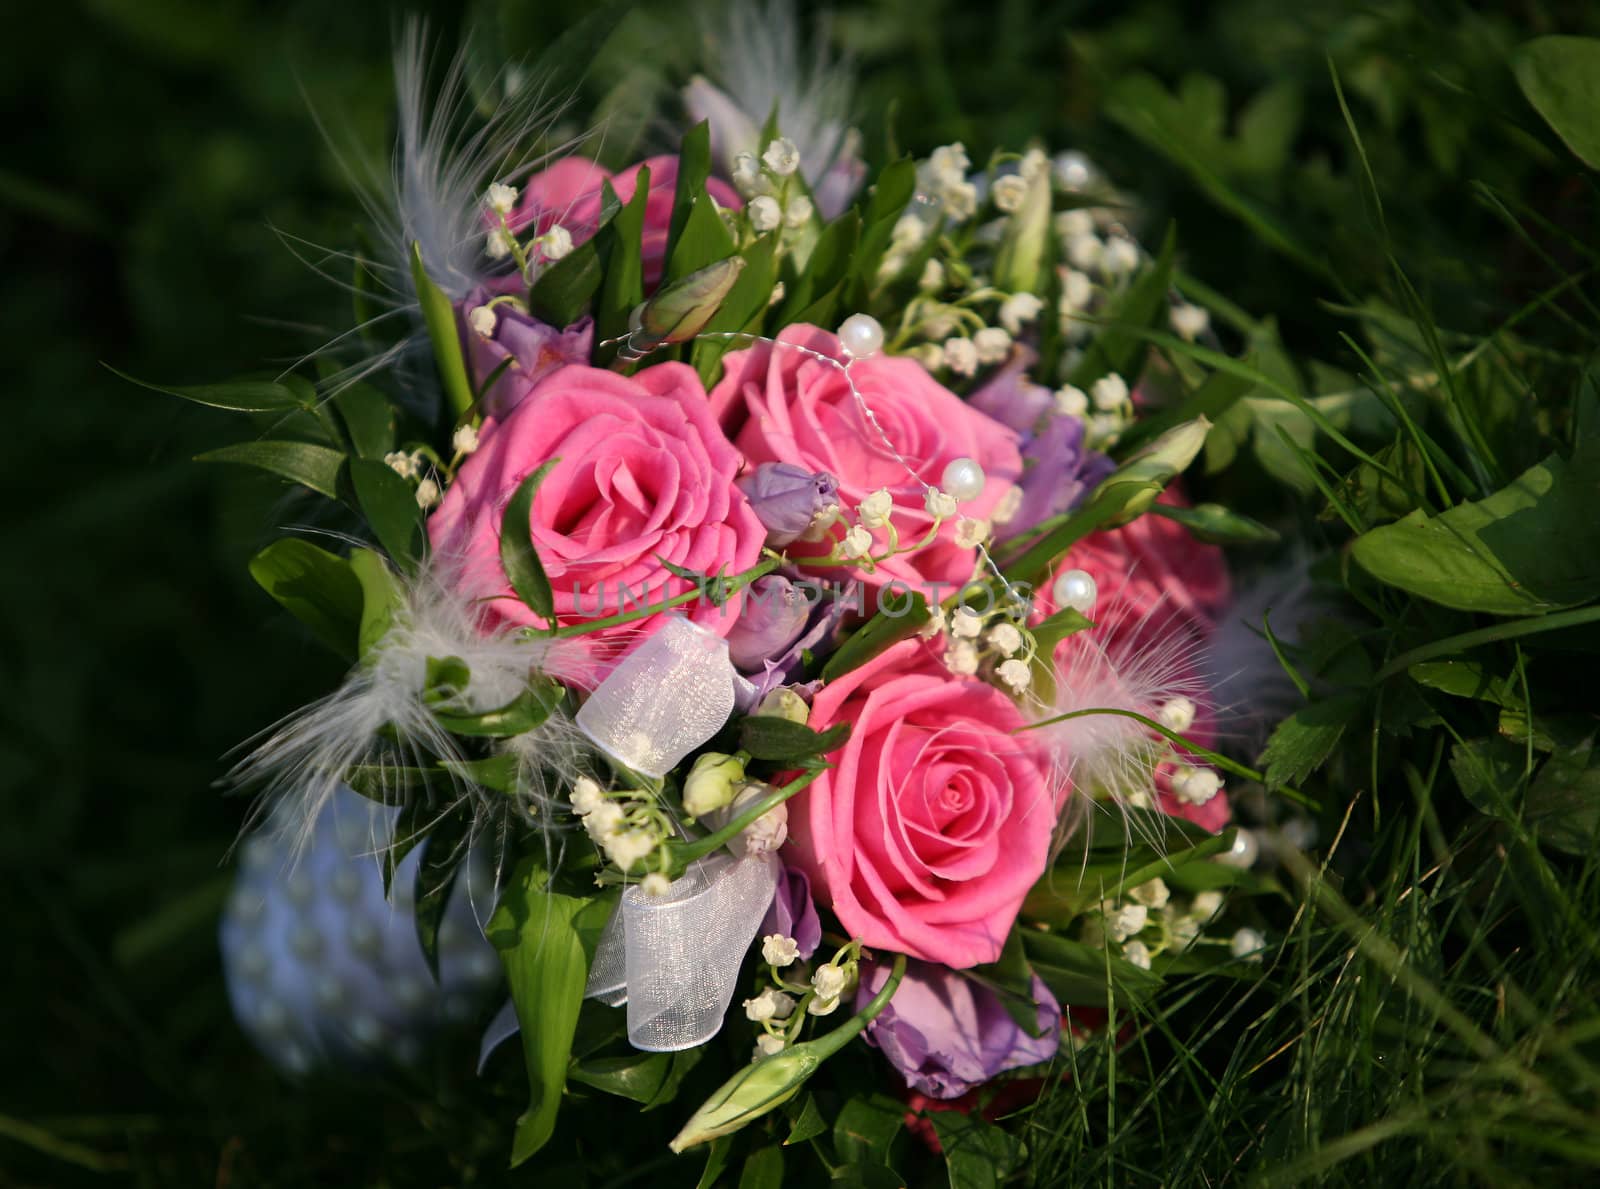 Wedding bouquet from roses in a grass